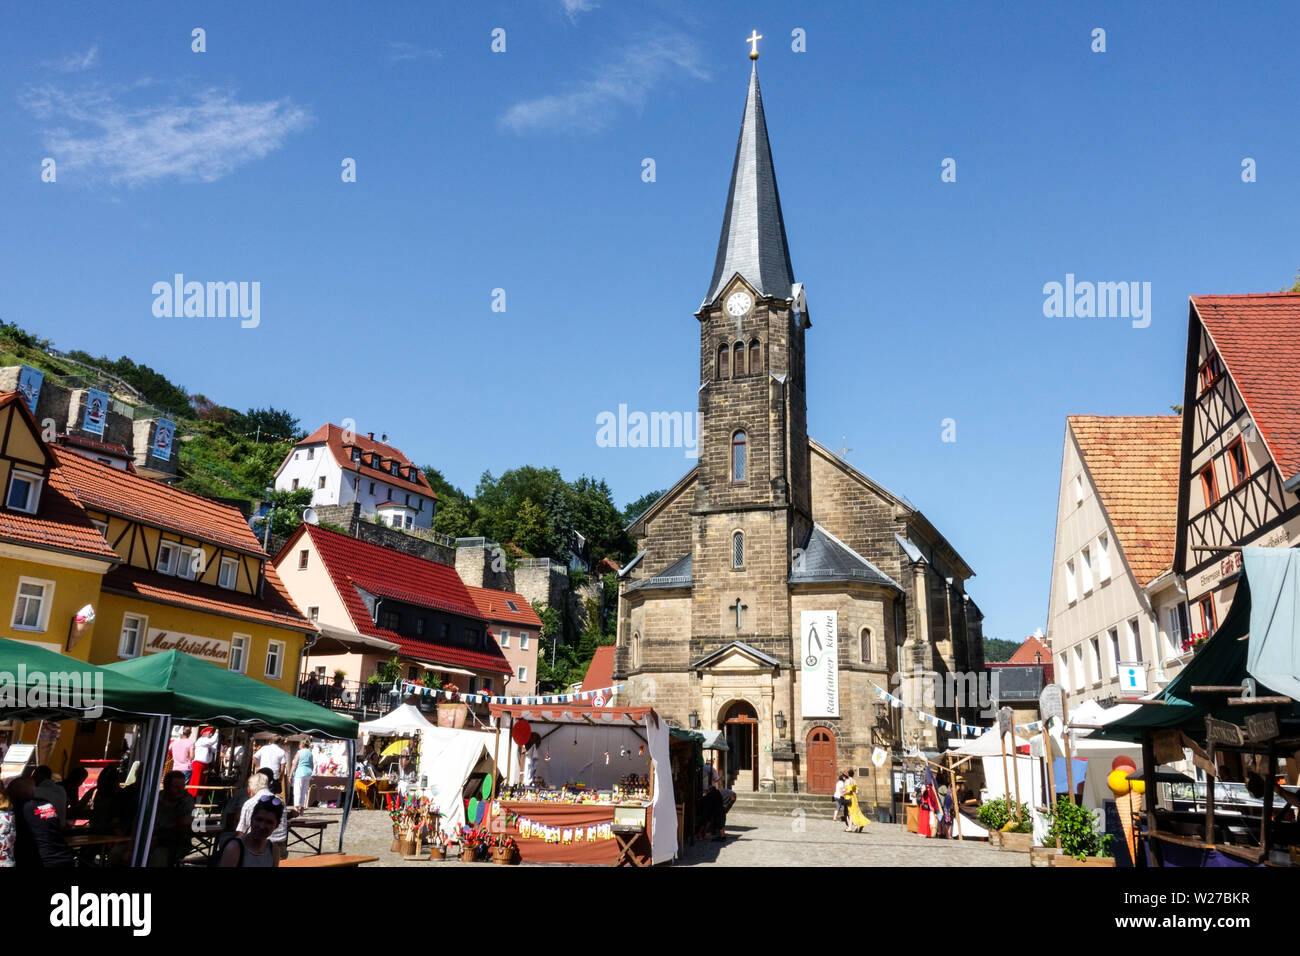 Picturesque Town - Stadt Wehlen, Saxony, Germany Europe Stock Photo